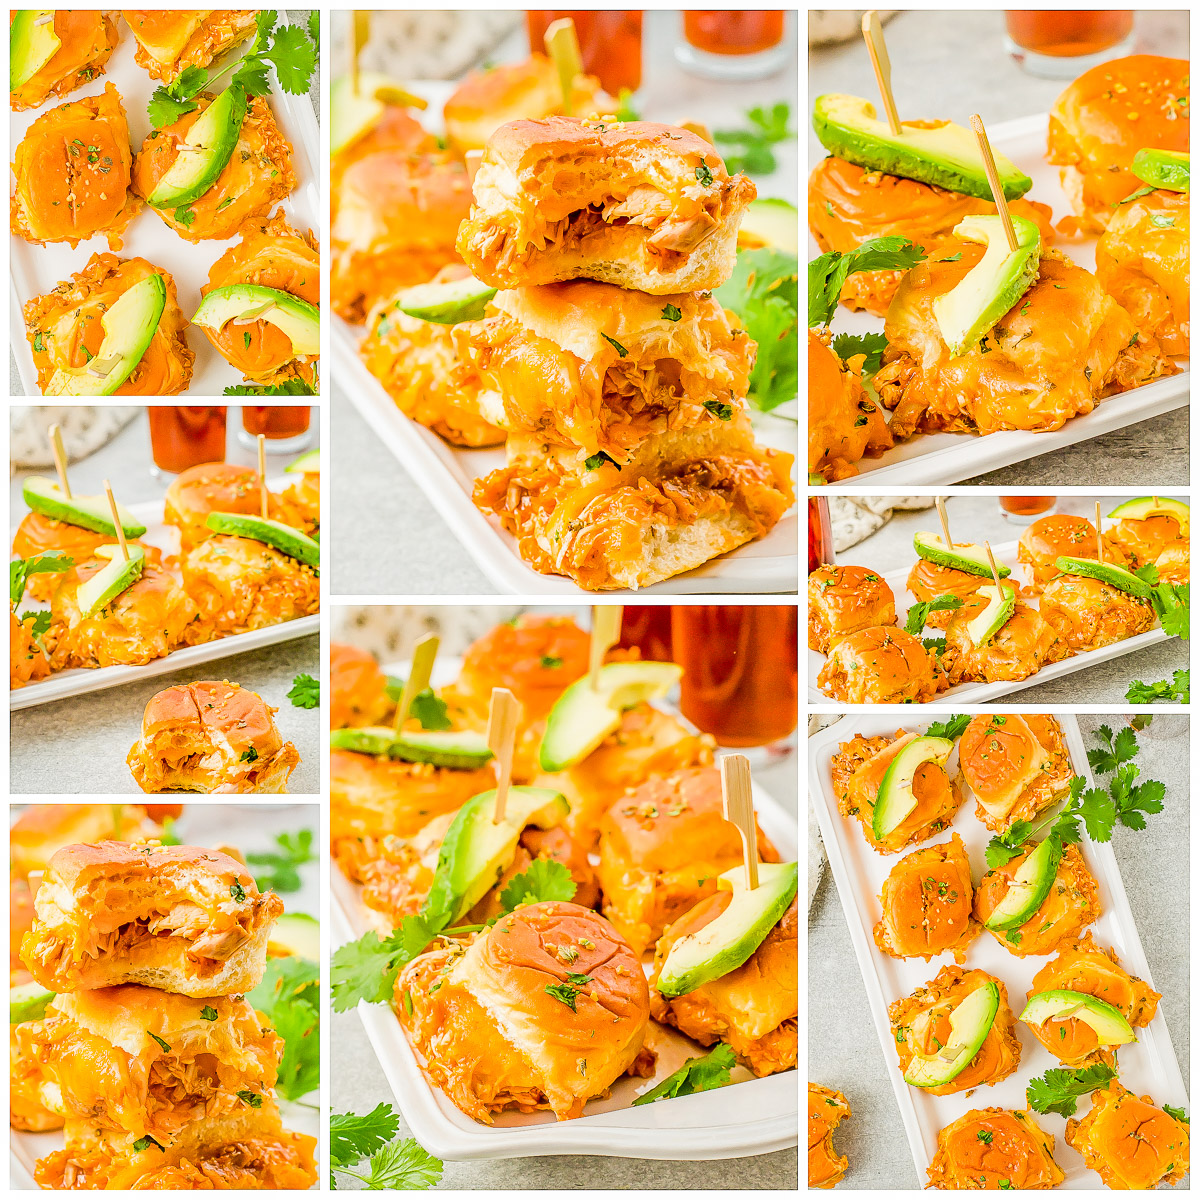 Chicken Enchilada Sliders - Juicy shredded chicken is tossed in spicy enchilada sauce and is layered in soft Hawaiian rolls along with plenty of melted cheese! Brush them with a melted garlic butter and oregano mixture and garnish with cilantro and avocado! PERFECT for entertaining, game days, Superbowl, or a FAST and EASY weeknight dinner that's ready in 30 minutes!